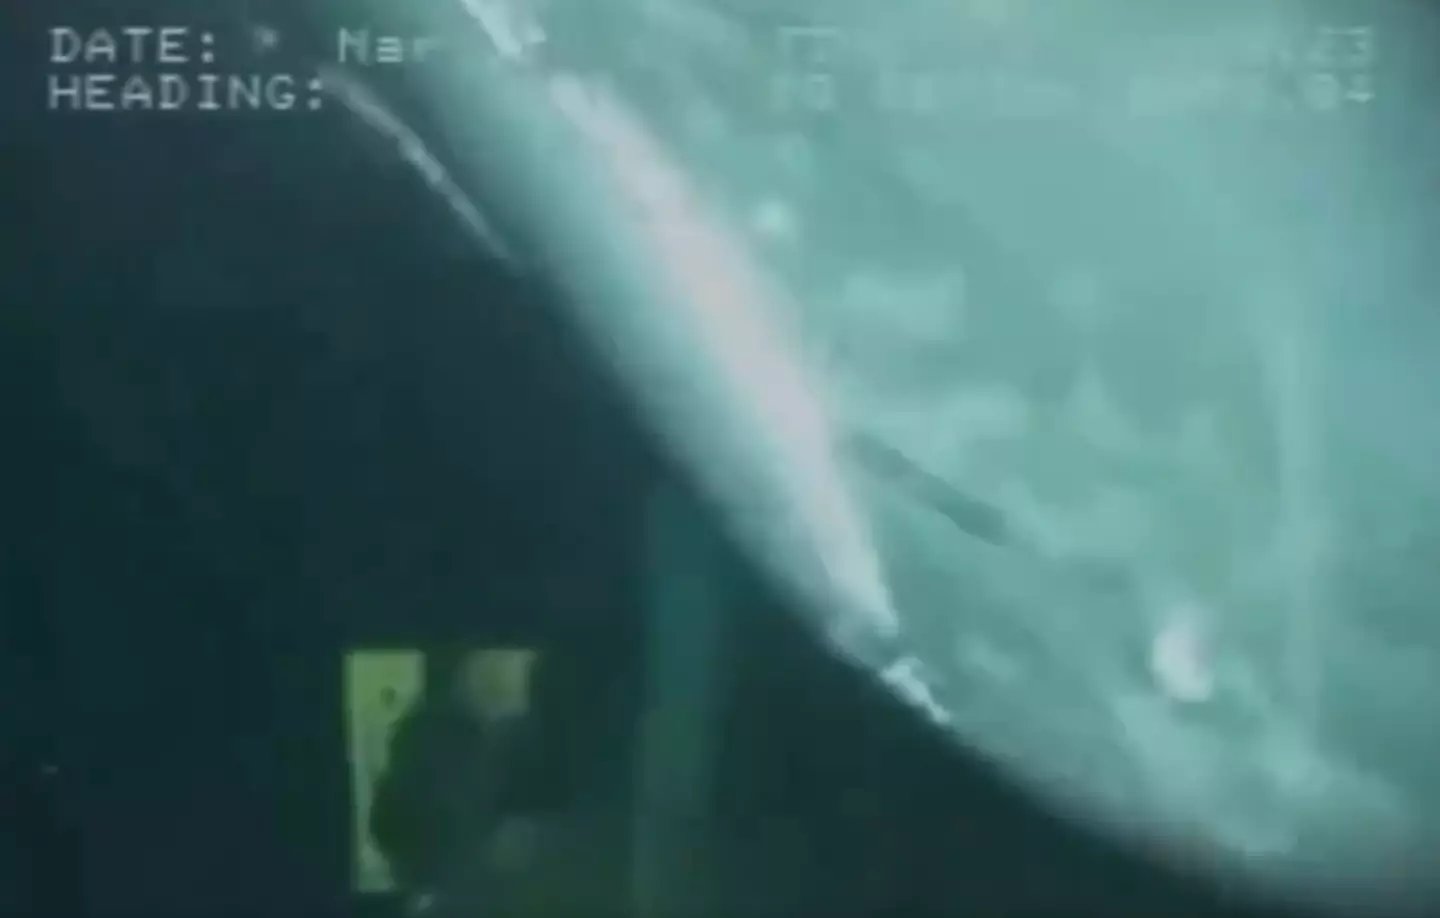 It's thought to have been a sperm whale that greeted the divers. (YouTube/Helix Energy Solutions)